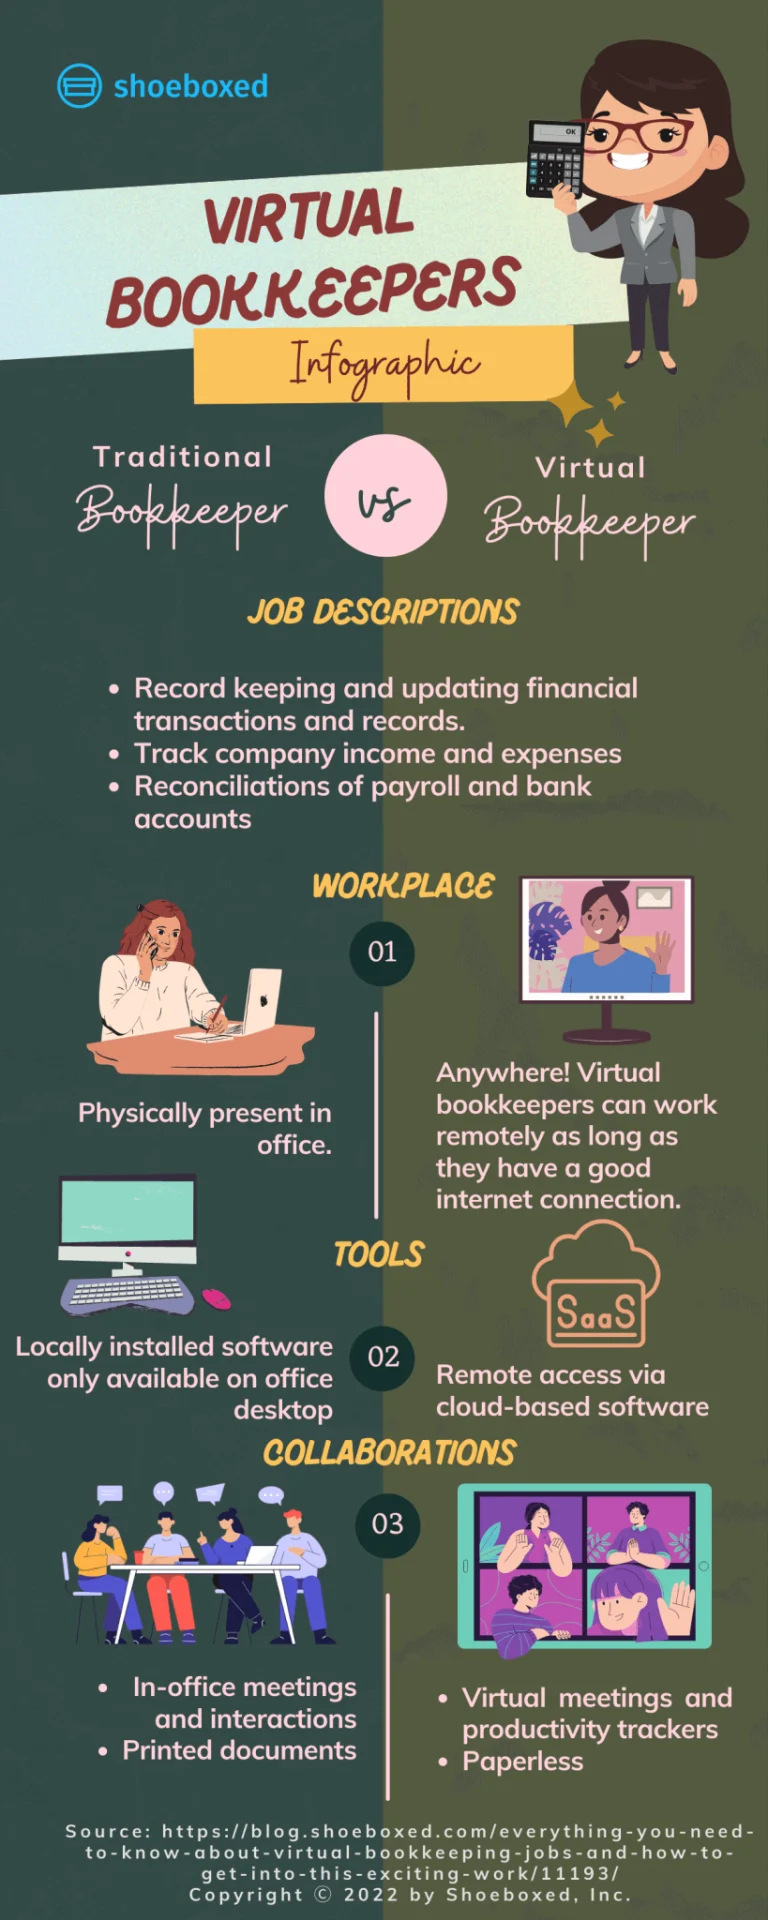 Virtual vs Traditional Bookkeeper